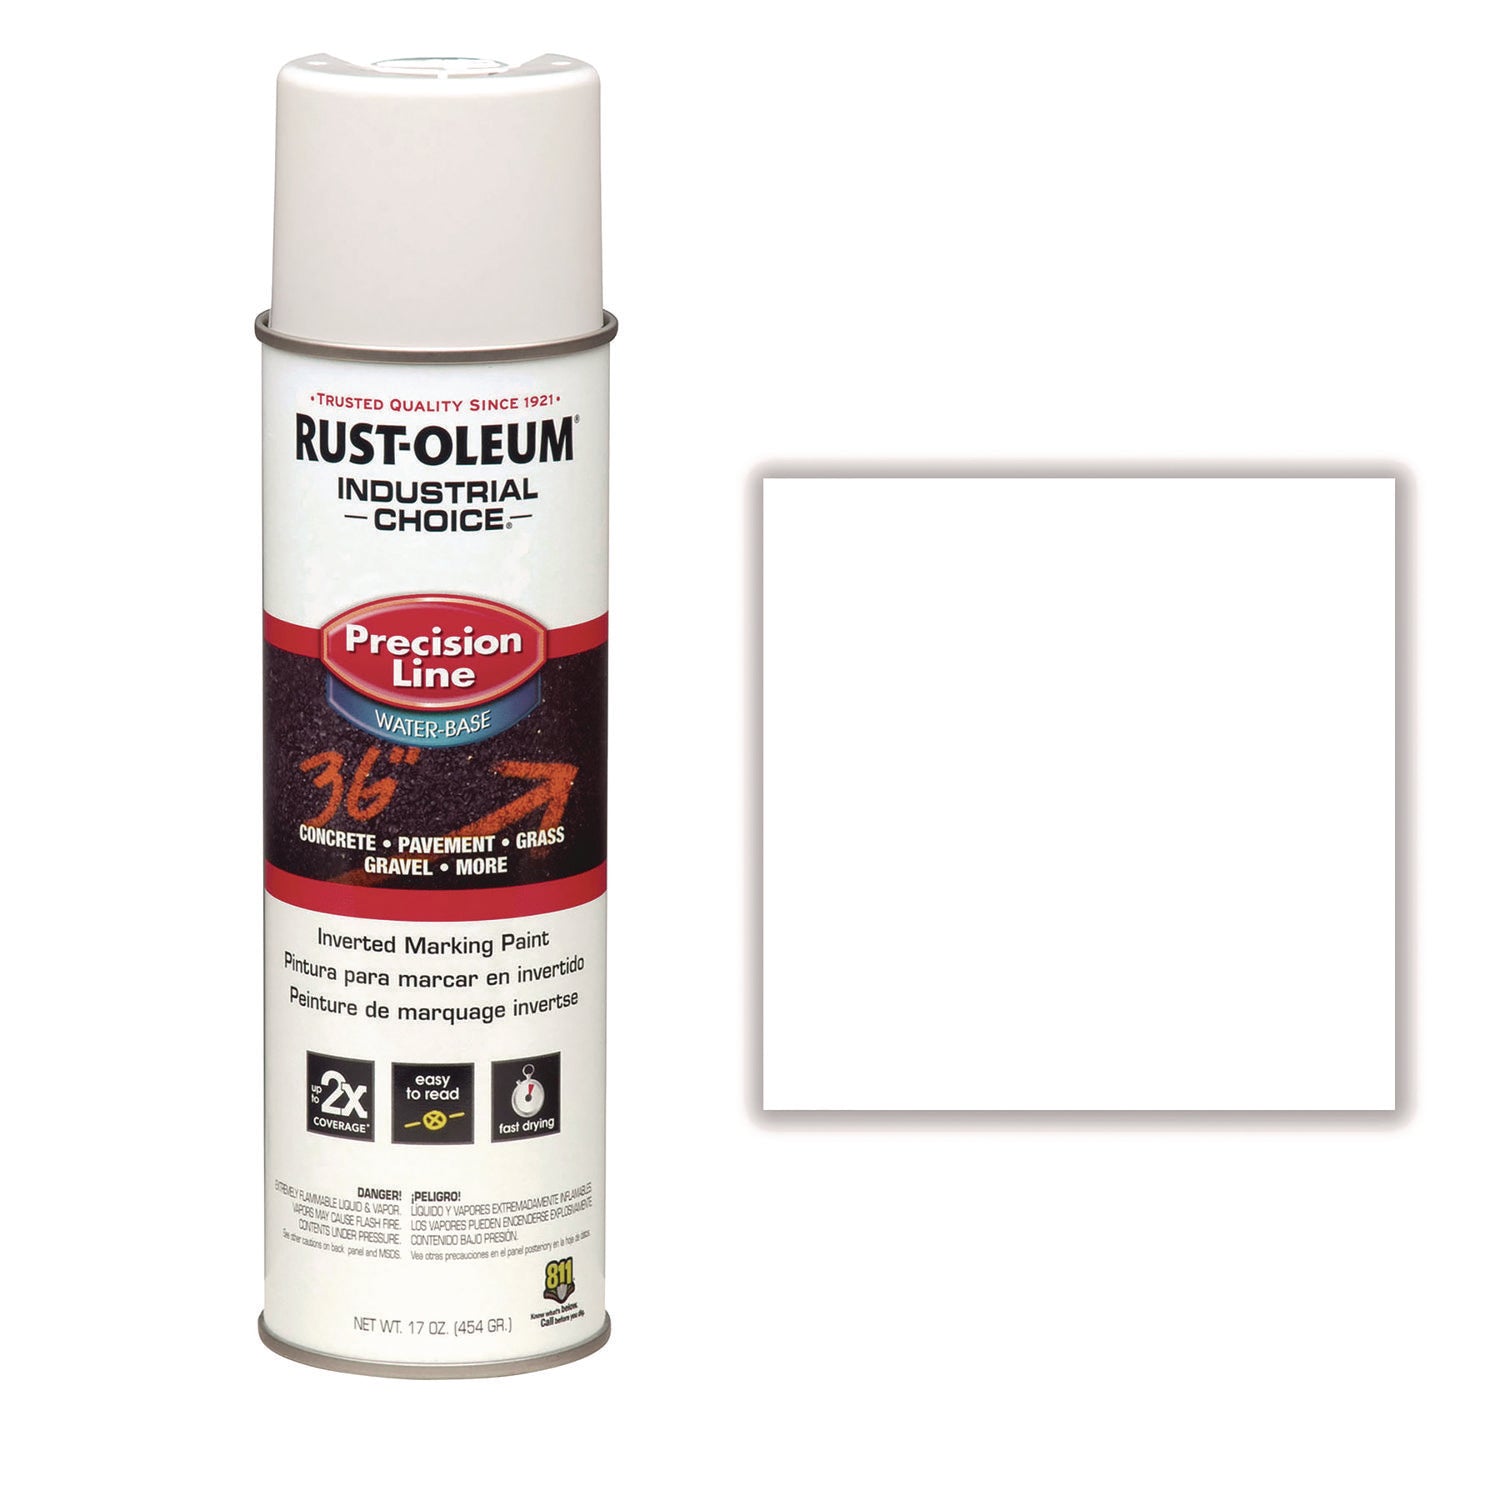 industrial-choice-m1800-system-water-based-precision-line-marking-paint-flat-white-17-oz-aerosol-can-12-carton_rst203039ct - 2